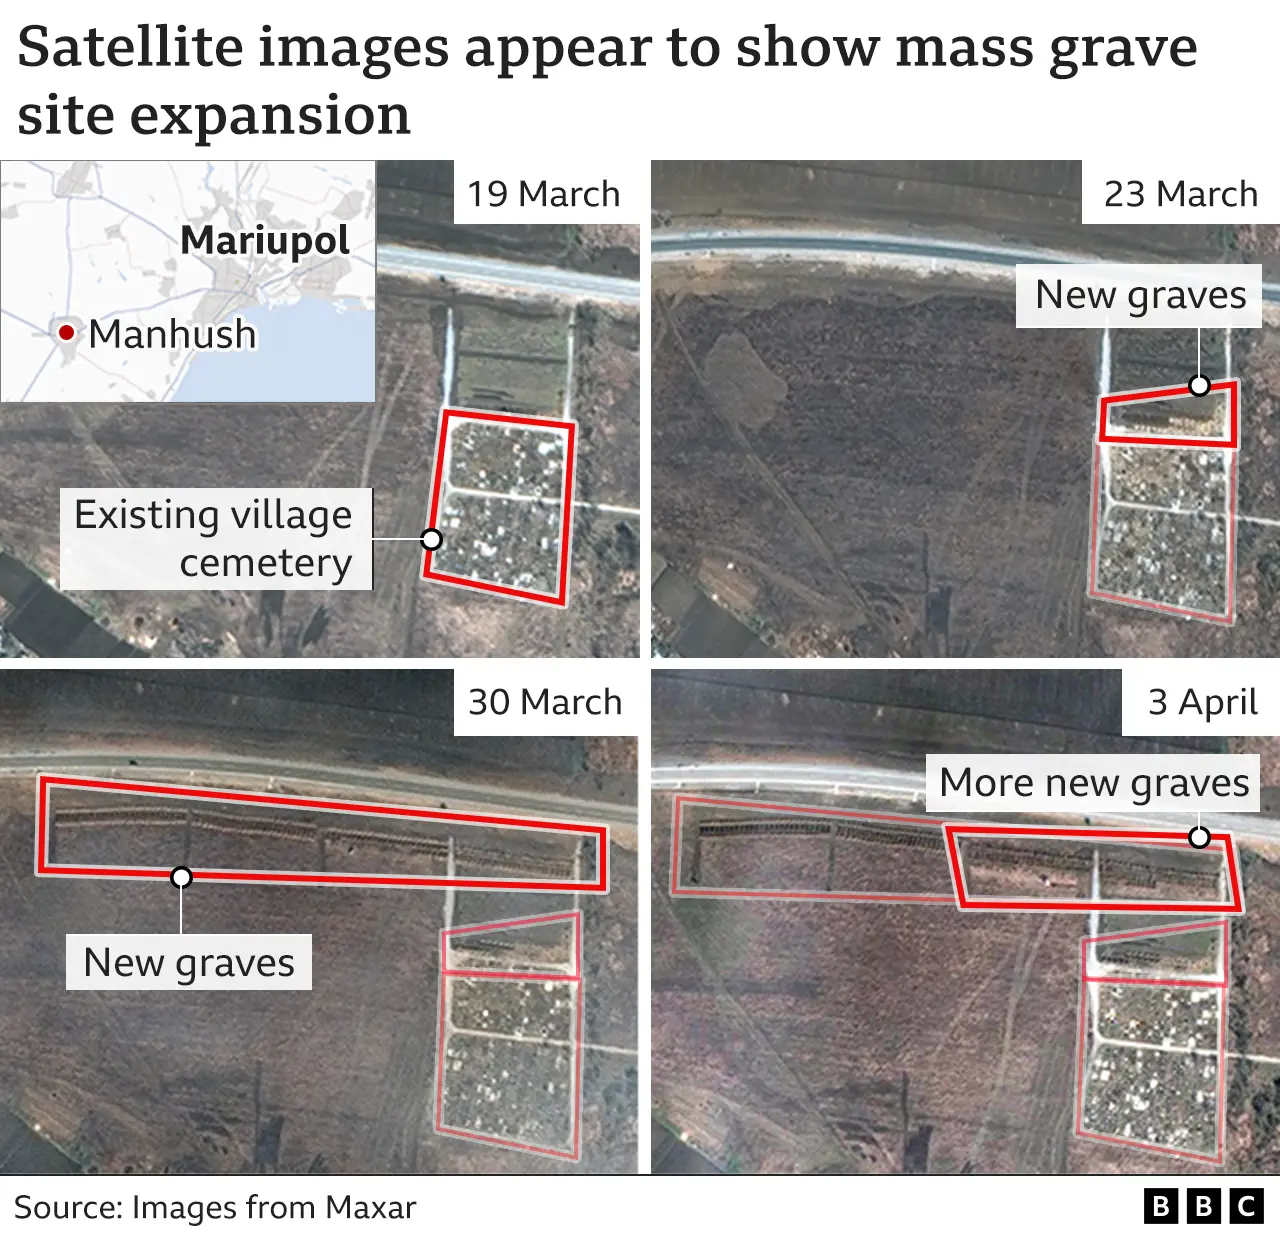 Are where images show evidence of mass graves